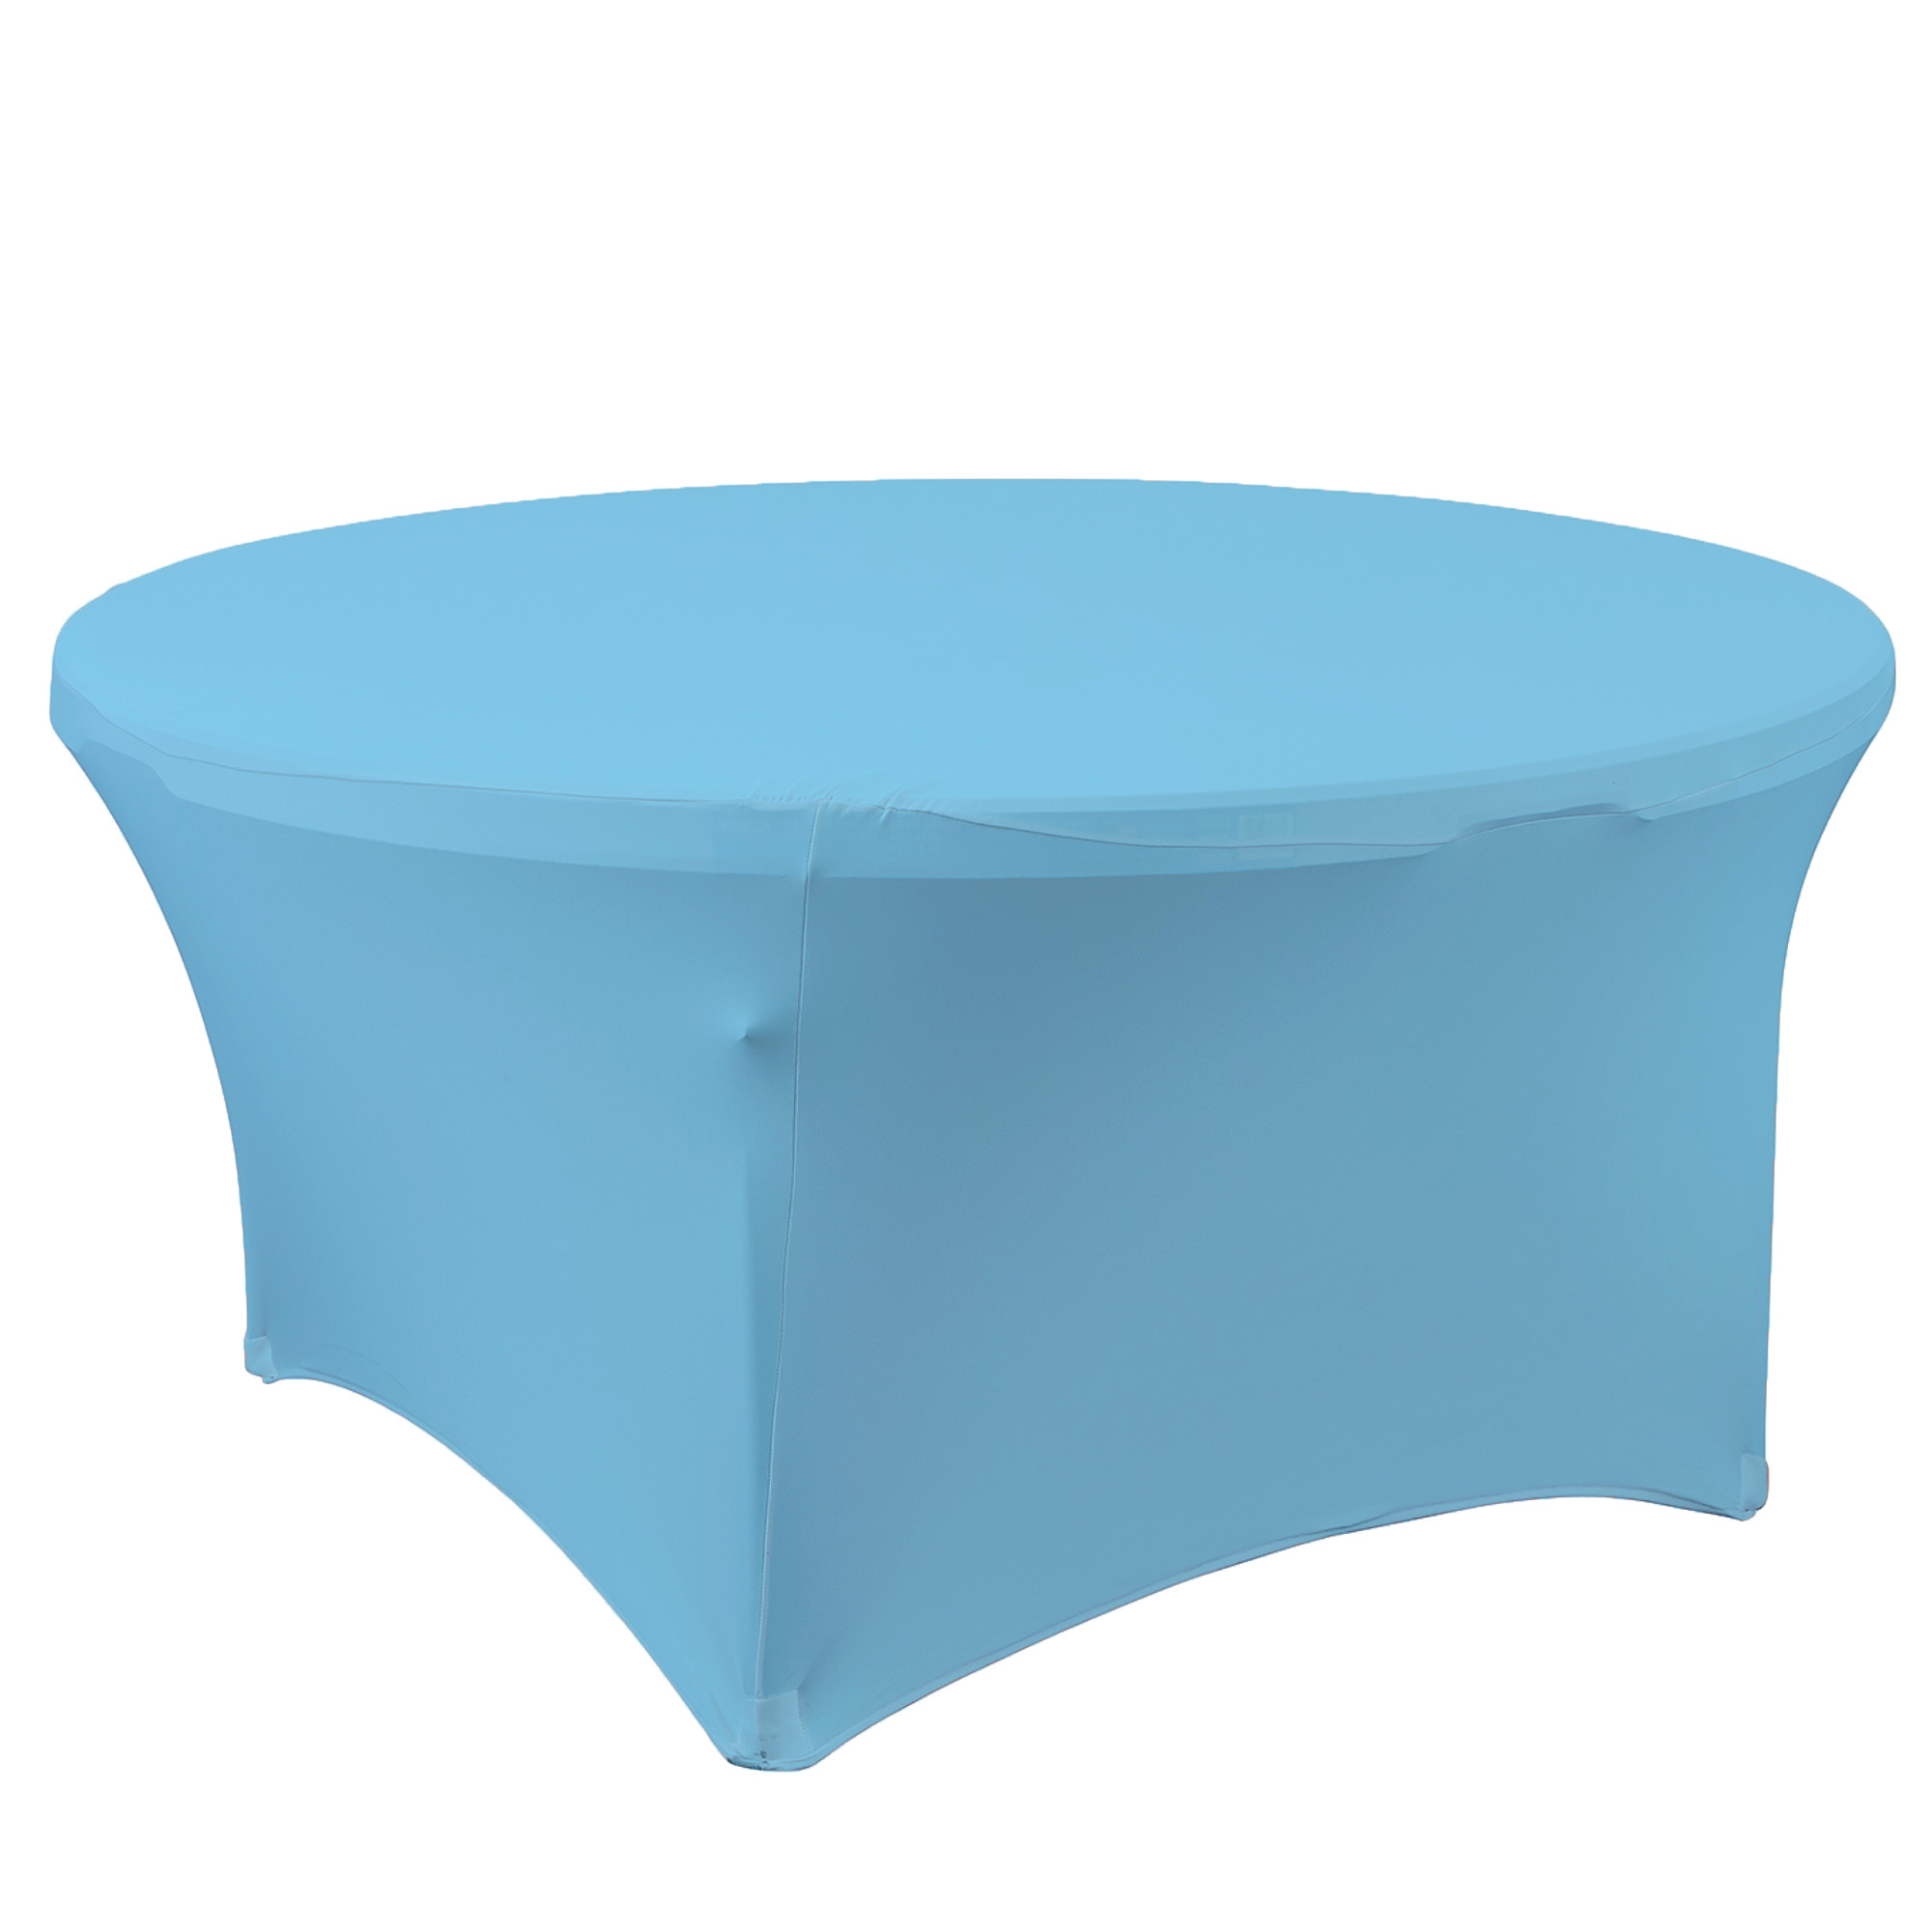 Spandex Round Table Cover 60" - Blue